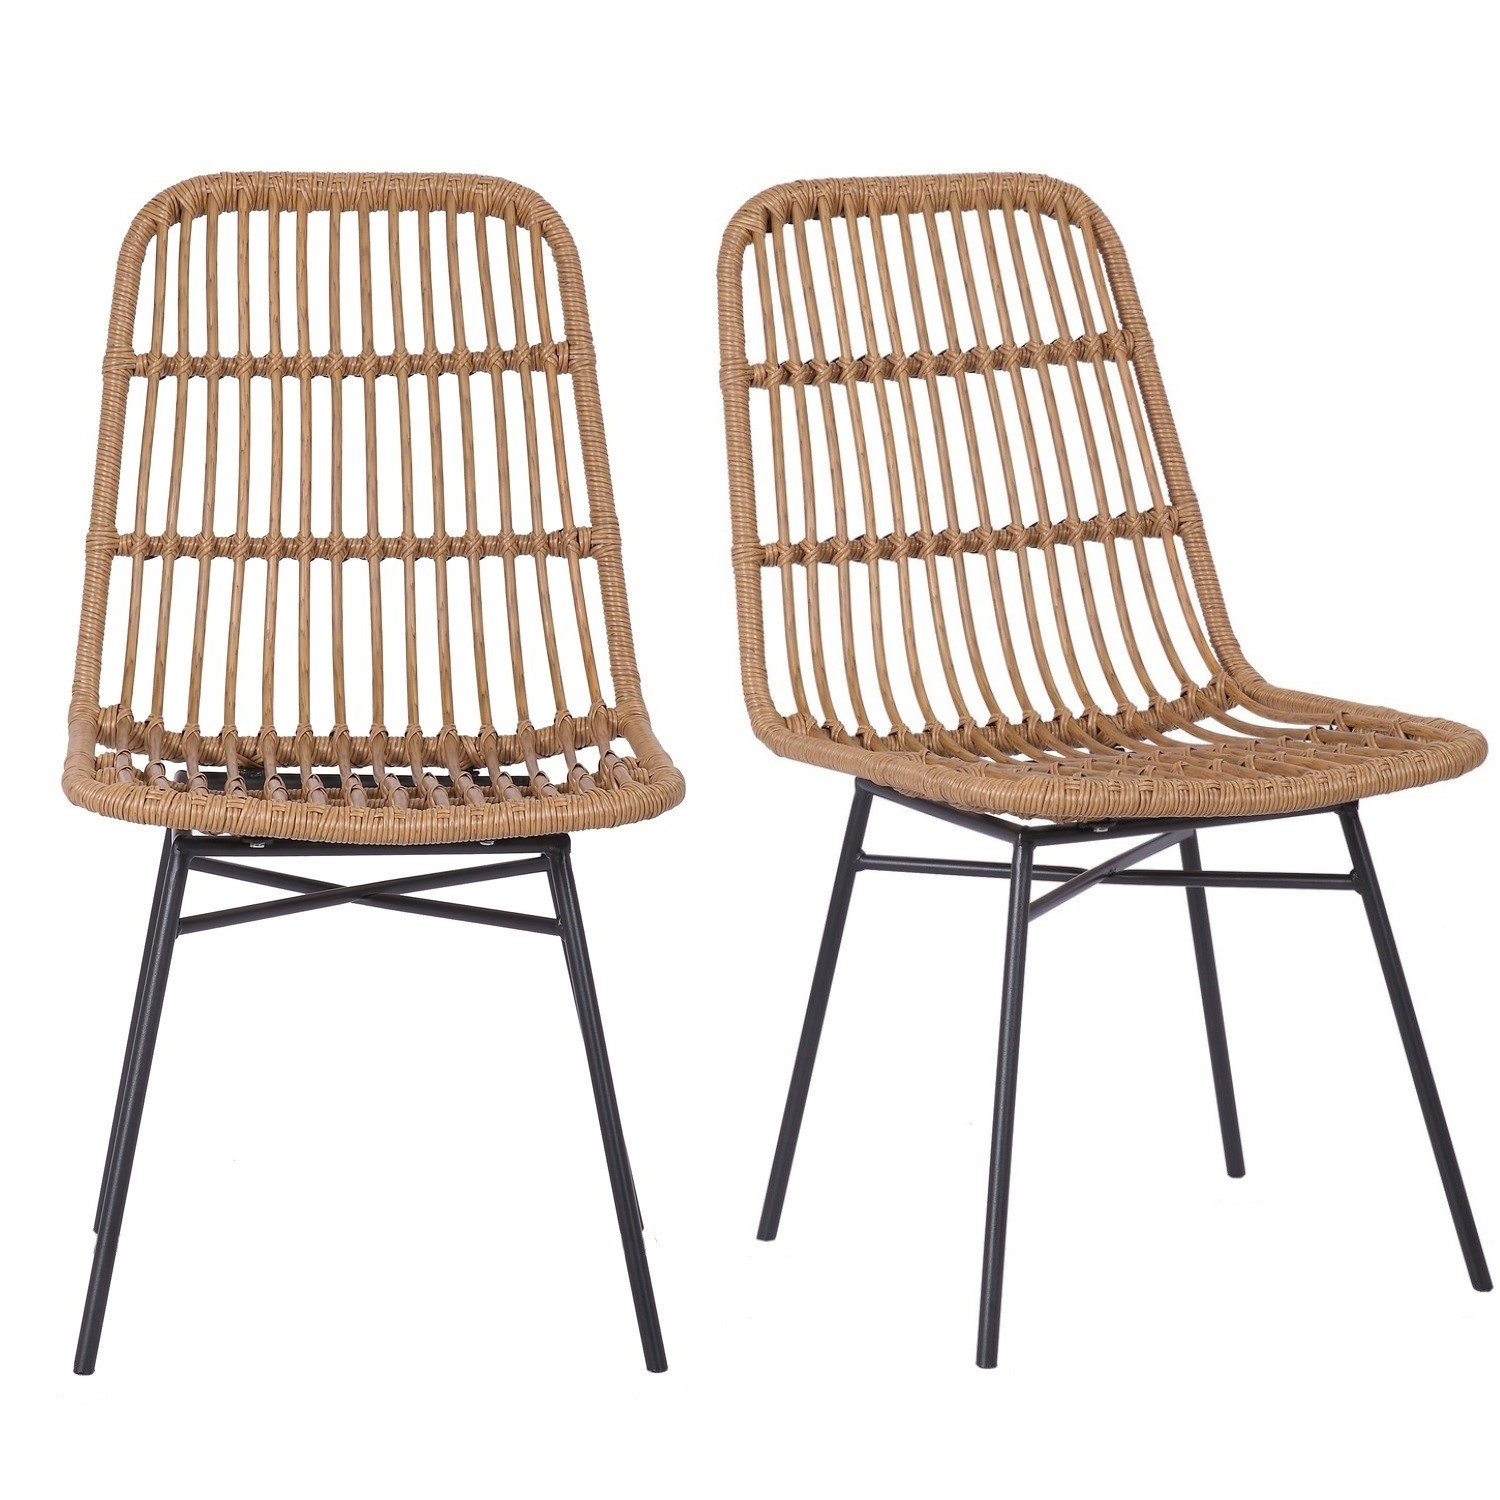 Read more about Set of 2 brown rattan dining chairs fion